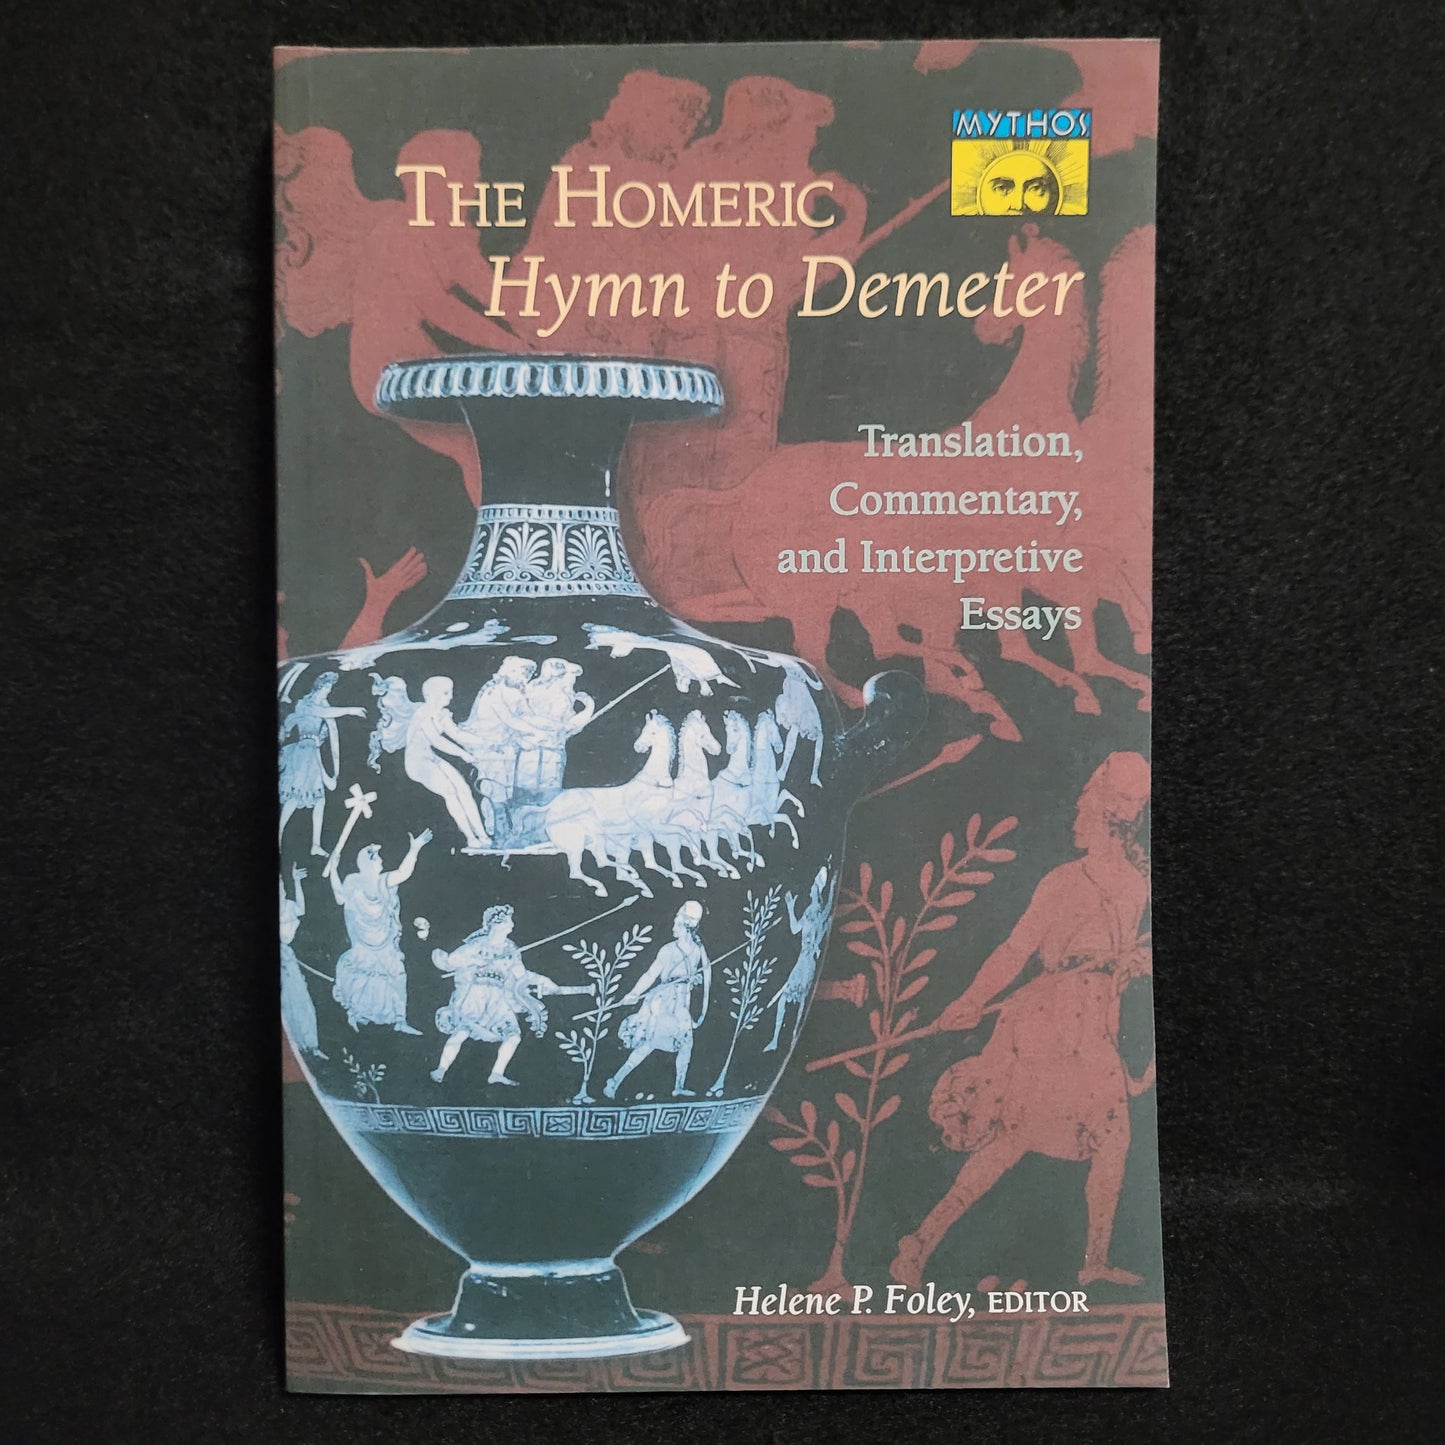 The Homeric Hymn to Demeter: Translation, Commentary, and Interpretive Essays Edited by Helene P. Foley (Princeton Umiversity Press, 1994) Paperback